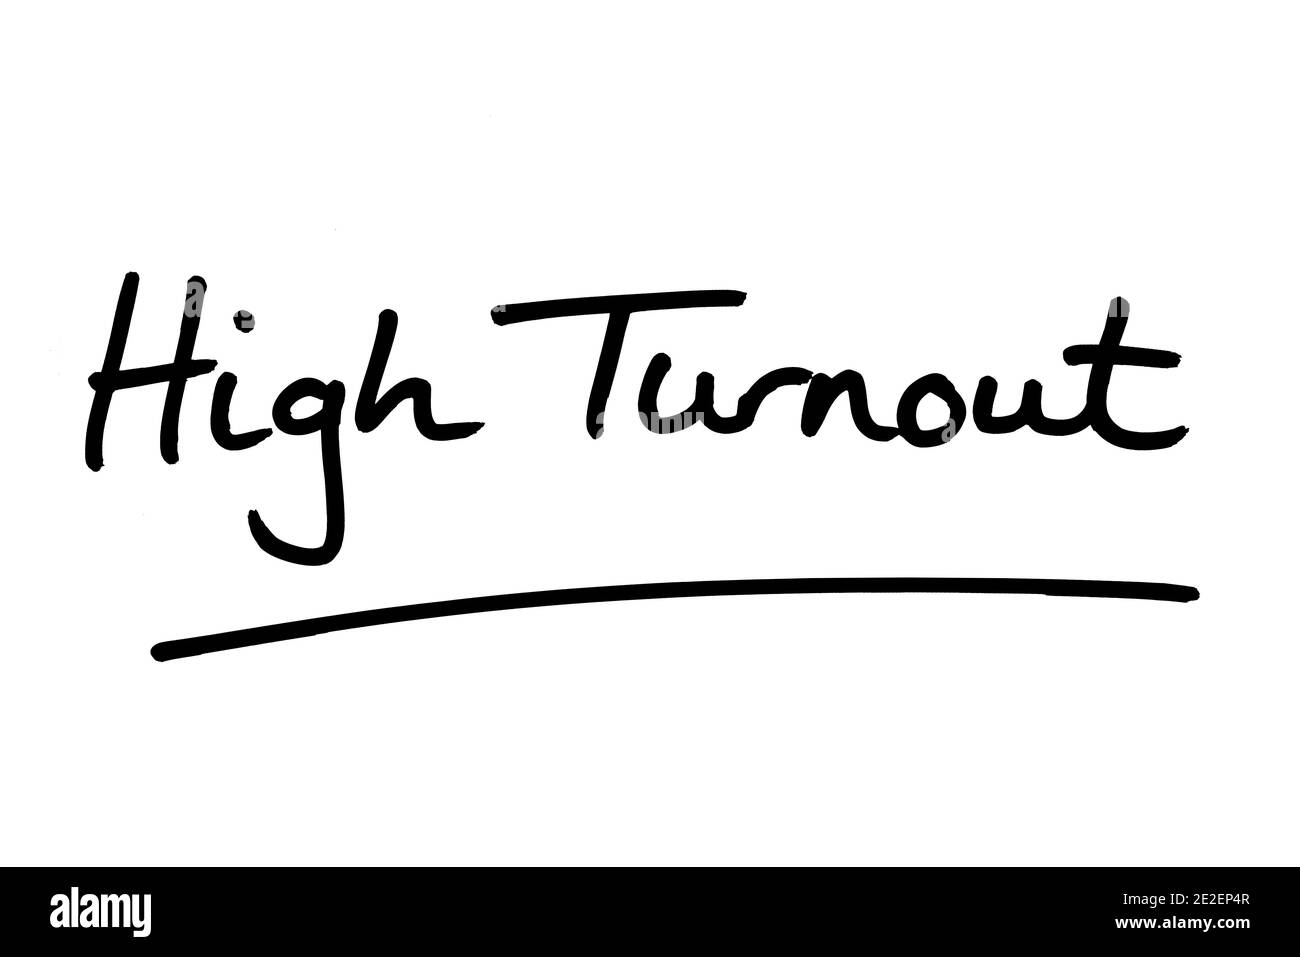 High Turnout, handwritten on a white background. Stock Photo